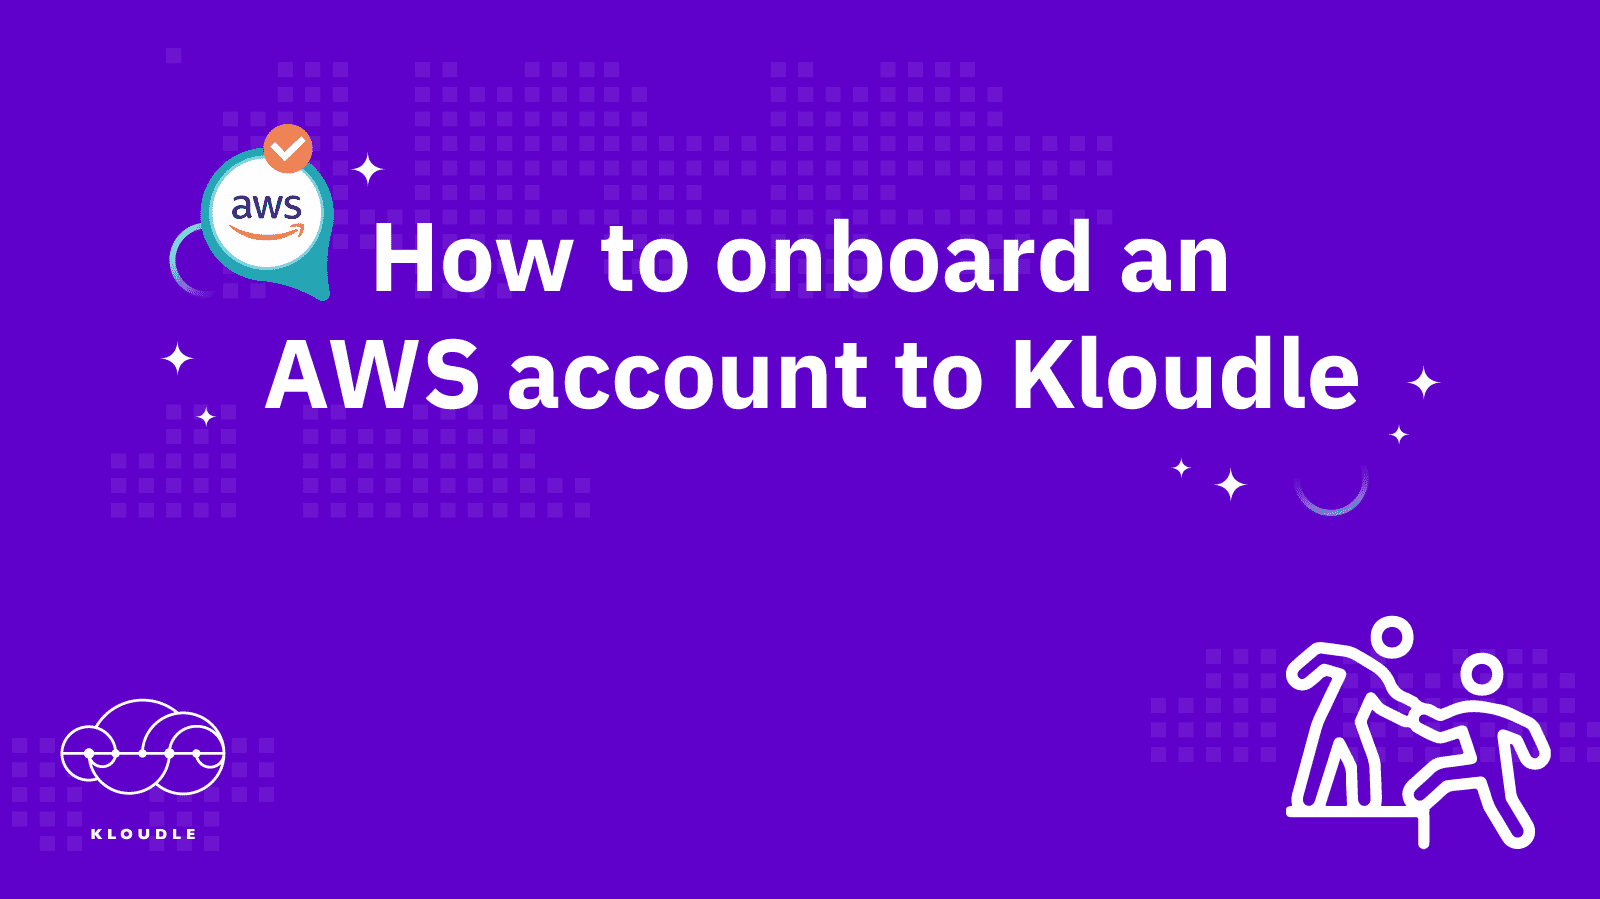 How to onboard an AWS account to Kloudle using a CloudFormation template